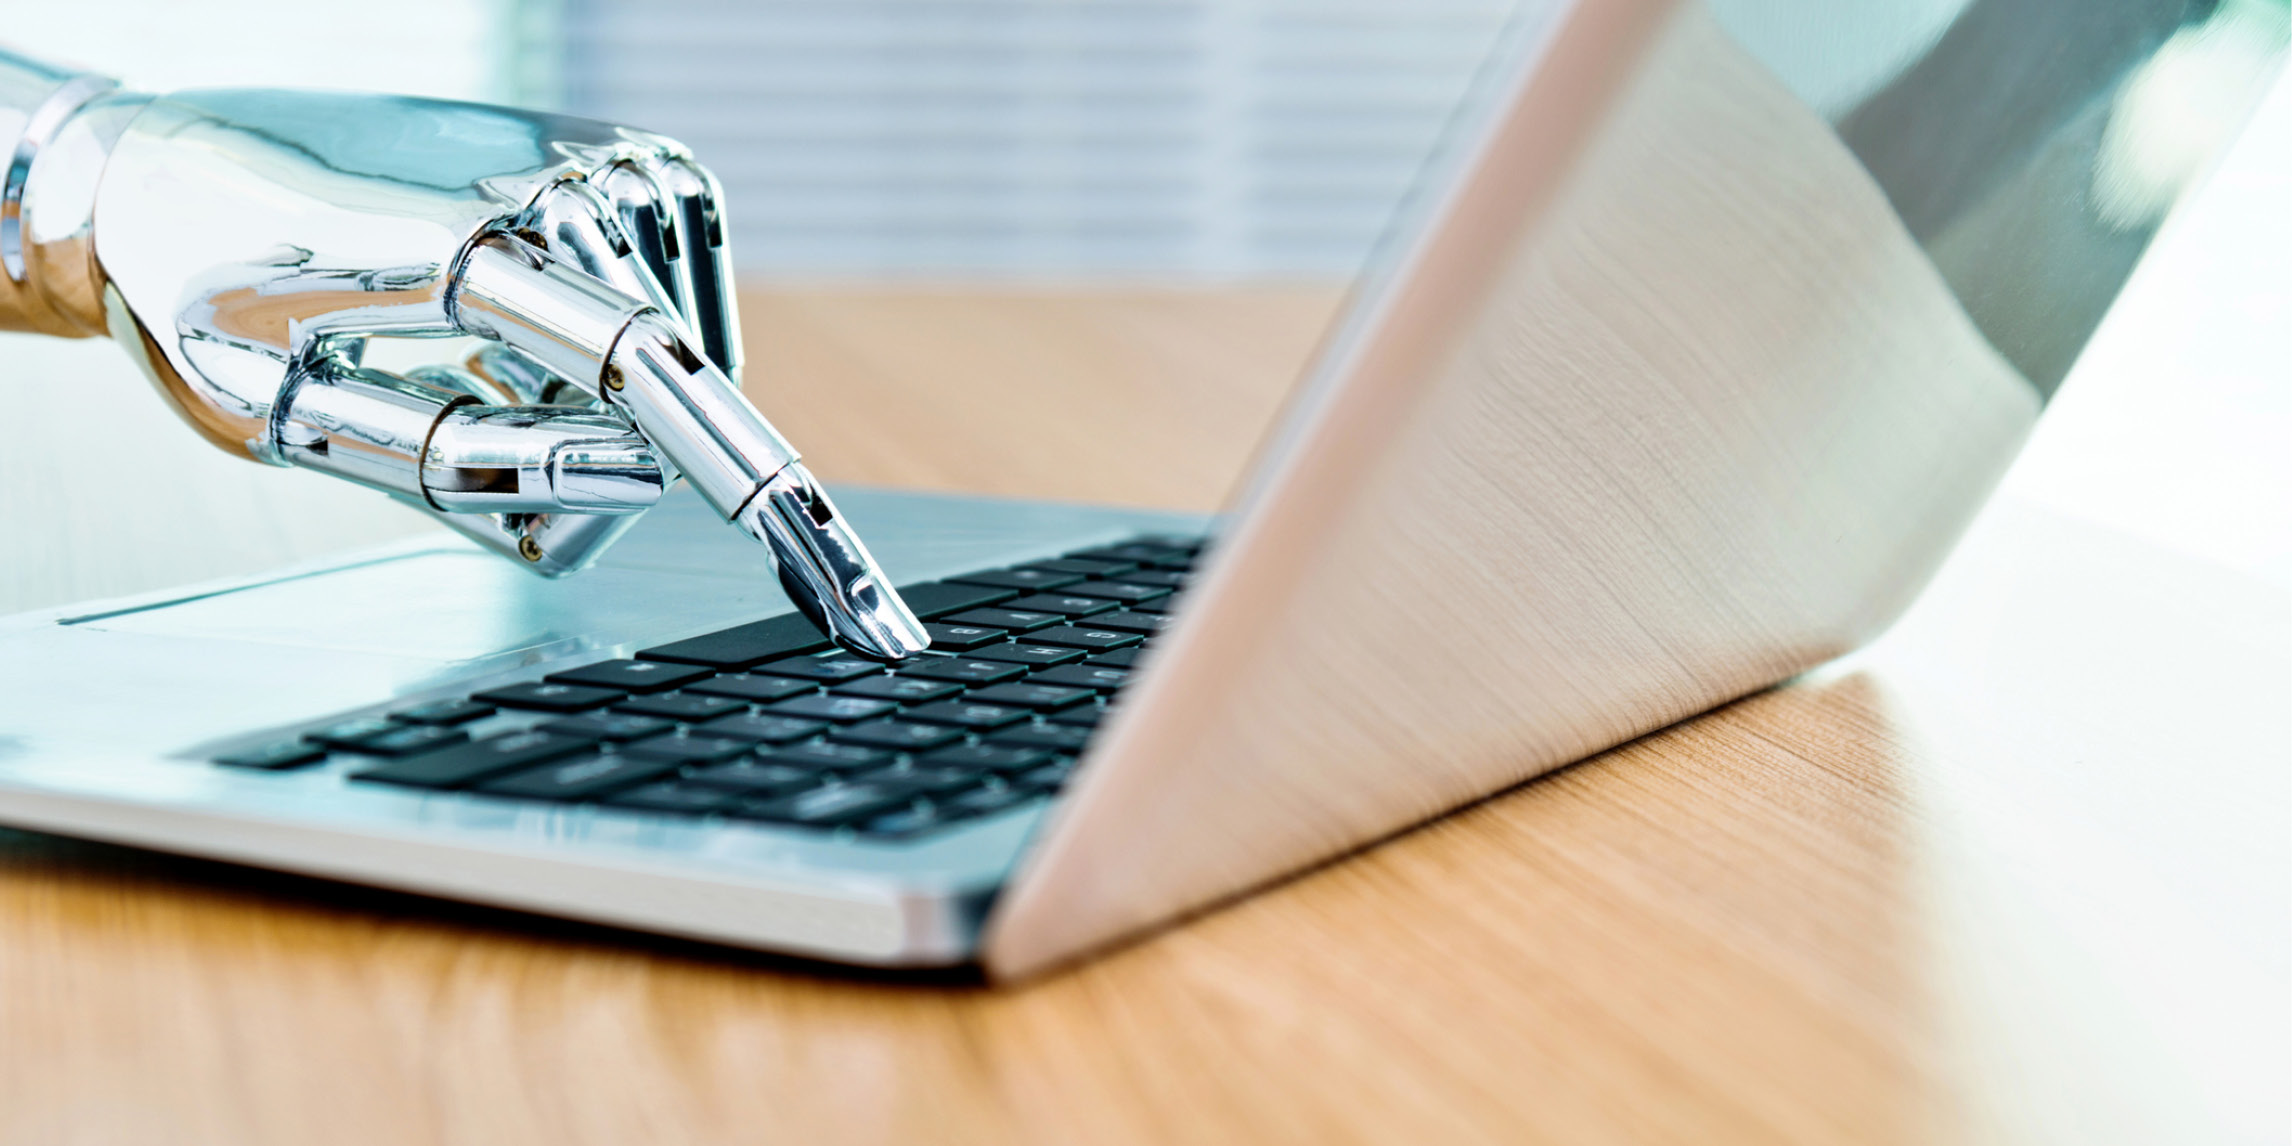 A robot hand typing on a laptop